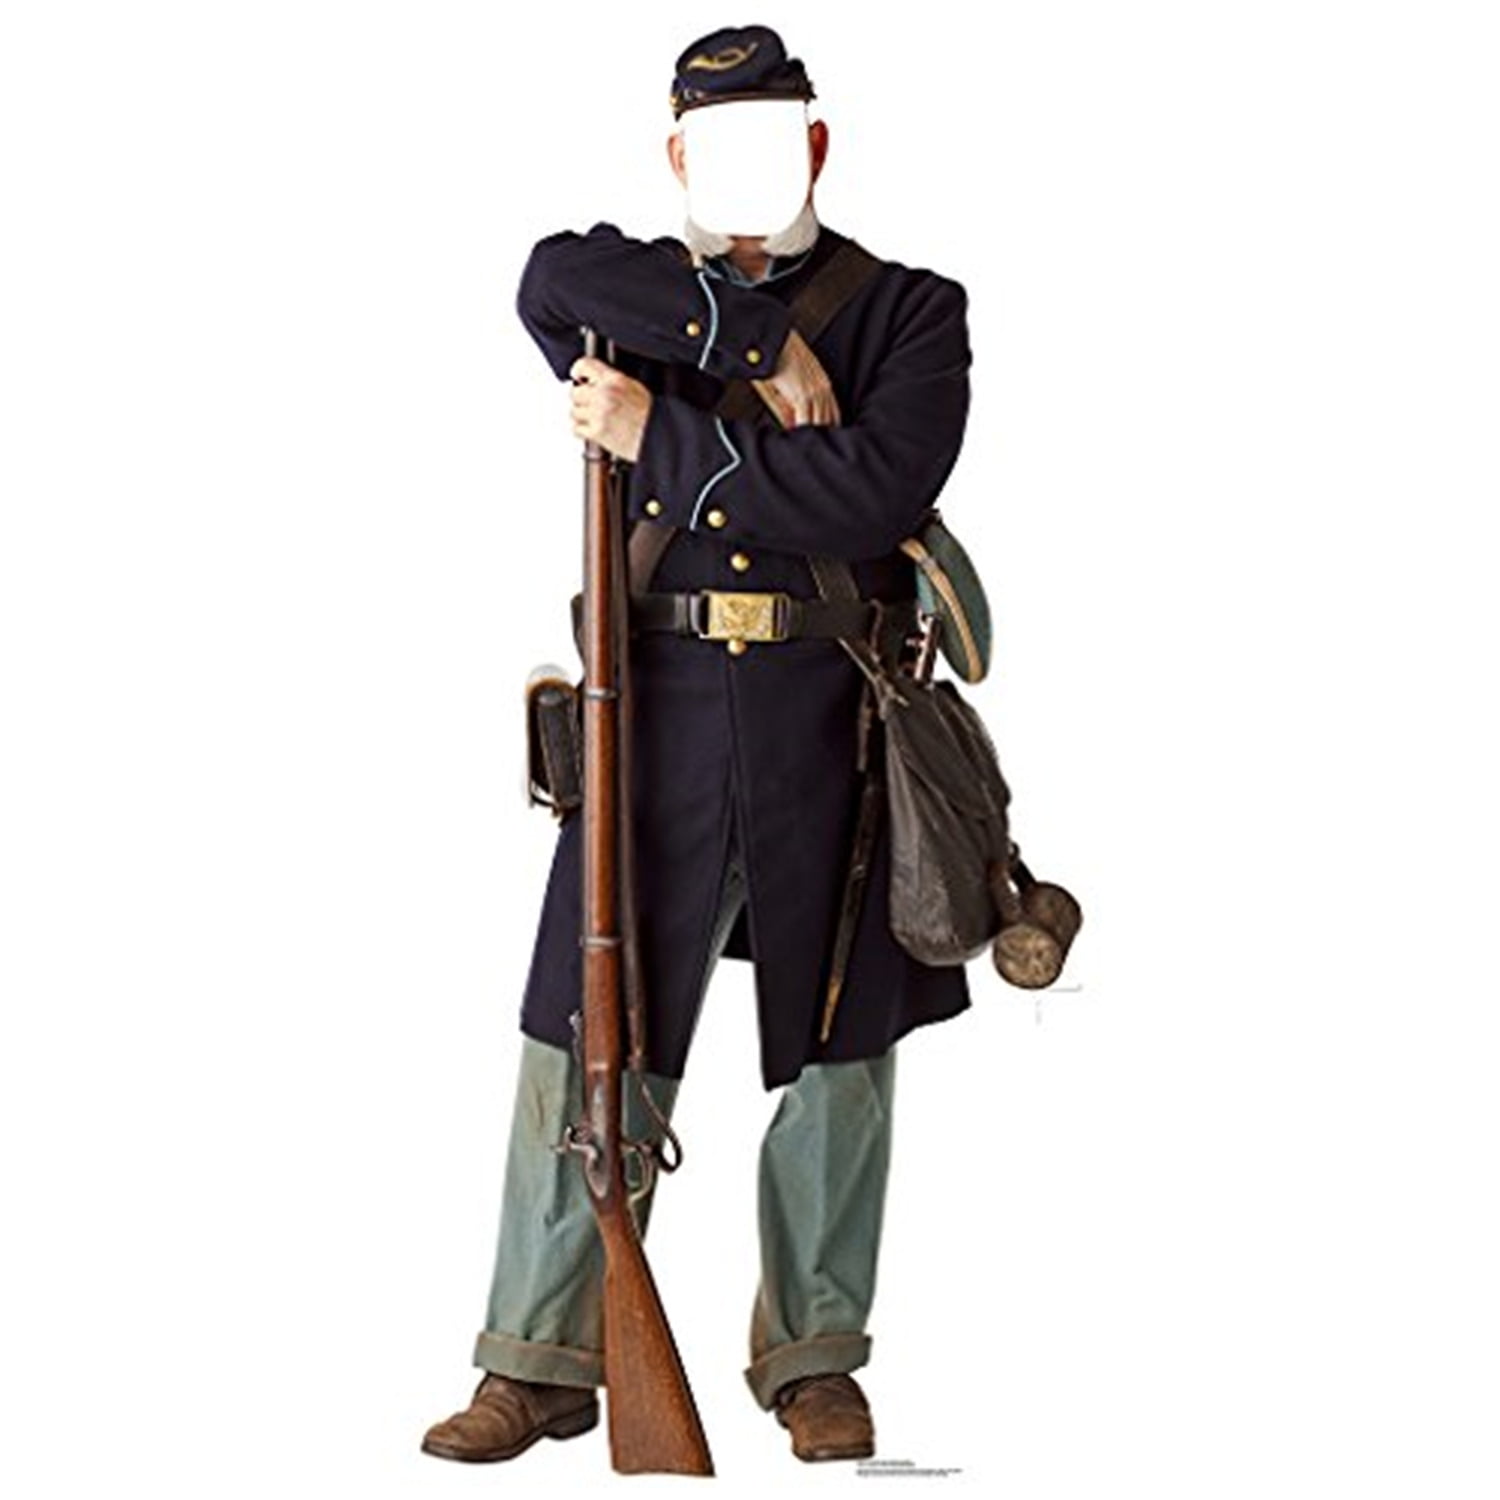 Picture of Advanced Graphics 1971 72 x 33 in. Union Civil War Soldier Standin Cardboard Standup